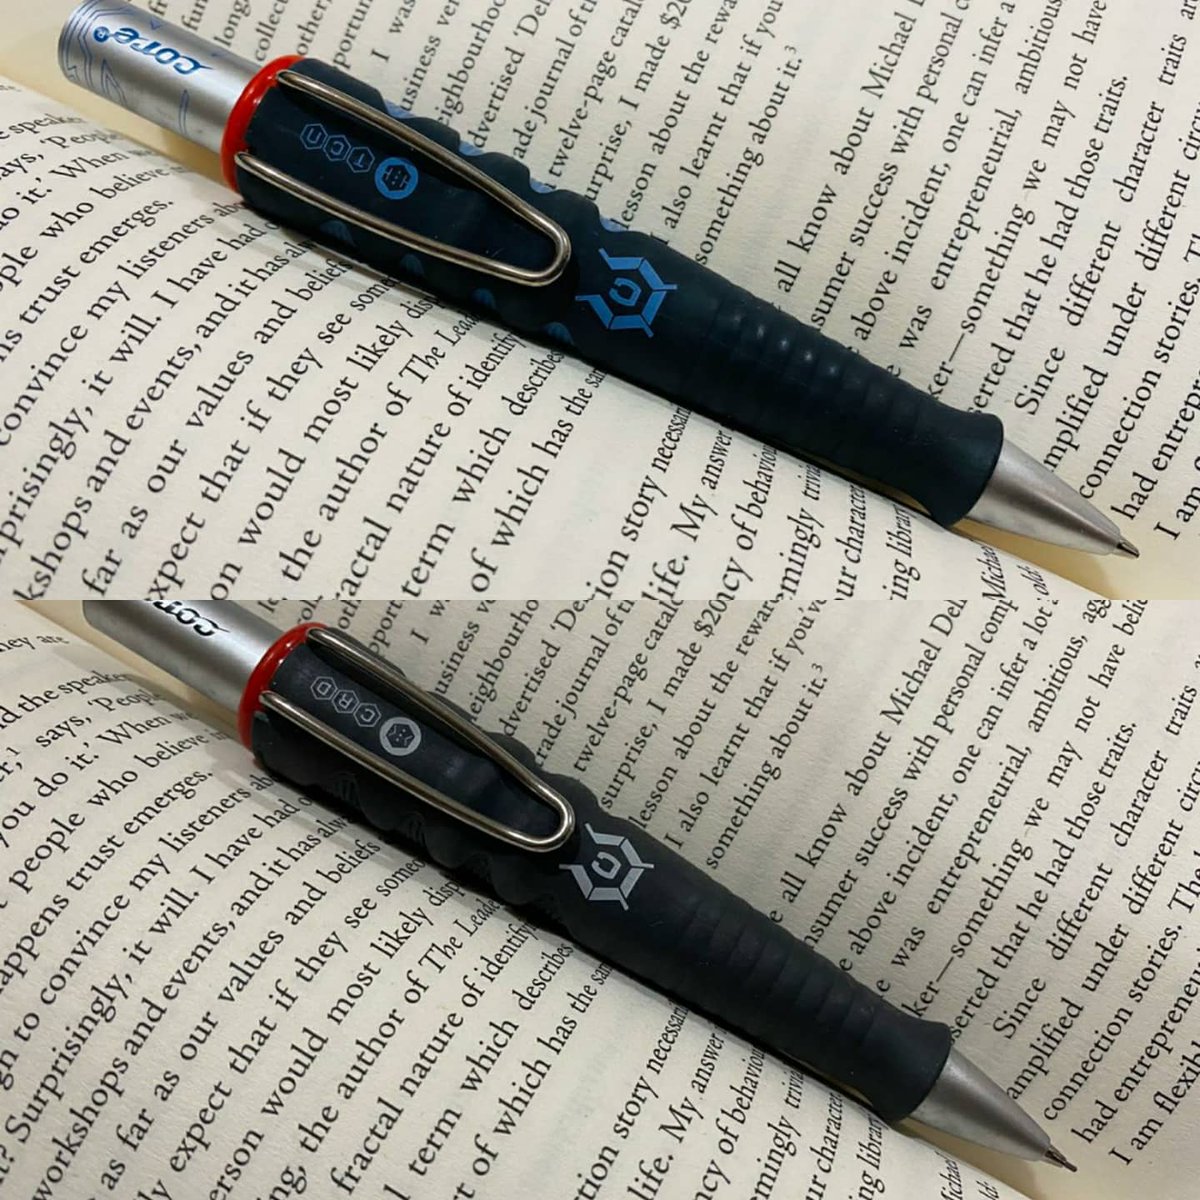 Rotring Mechanical Pencil Core Coridium 0.7mm

To buy/book or to know more about this mechanical pencil, WhatsApp/Telegram @+91 - 9664232159

#pencil #mechanicalpencil
#rotringpencils #mechanicalpencils #drawing #sketching #writing #handwriting #germany #rotring #thepenkart